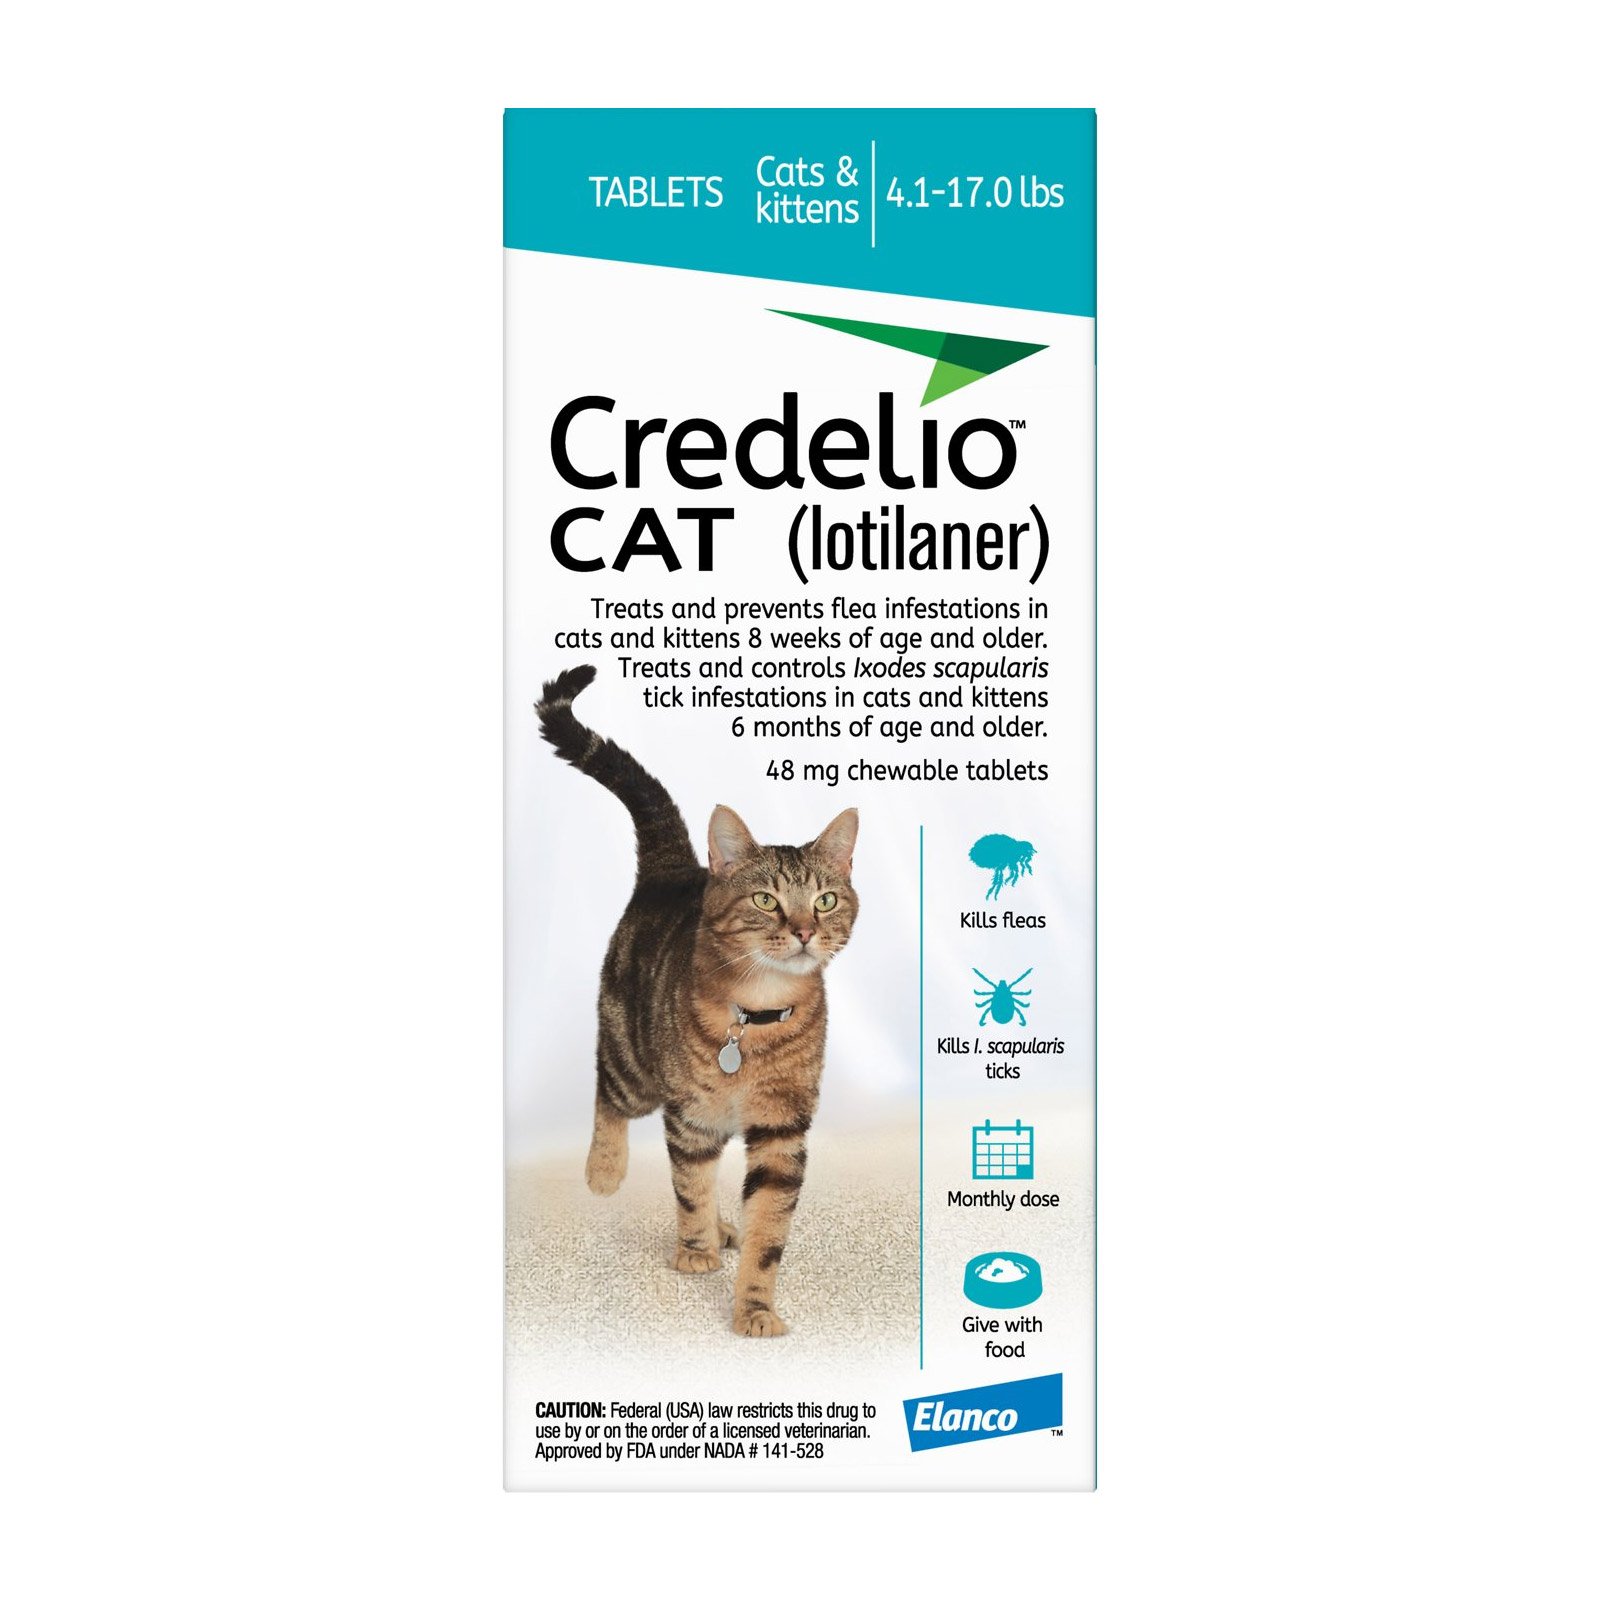 637287426306357675-credelio-for-cats.jpg